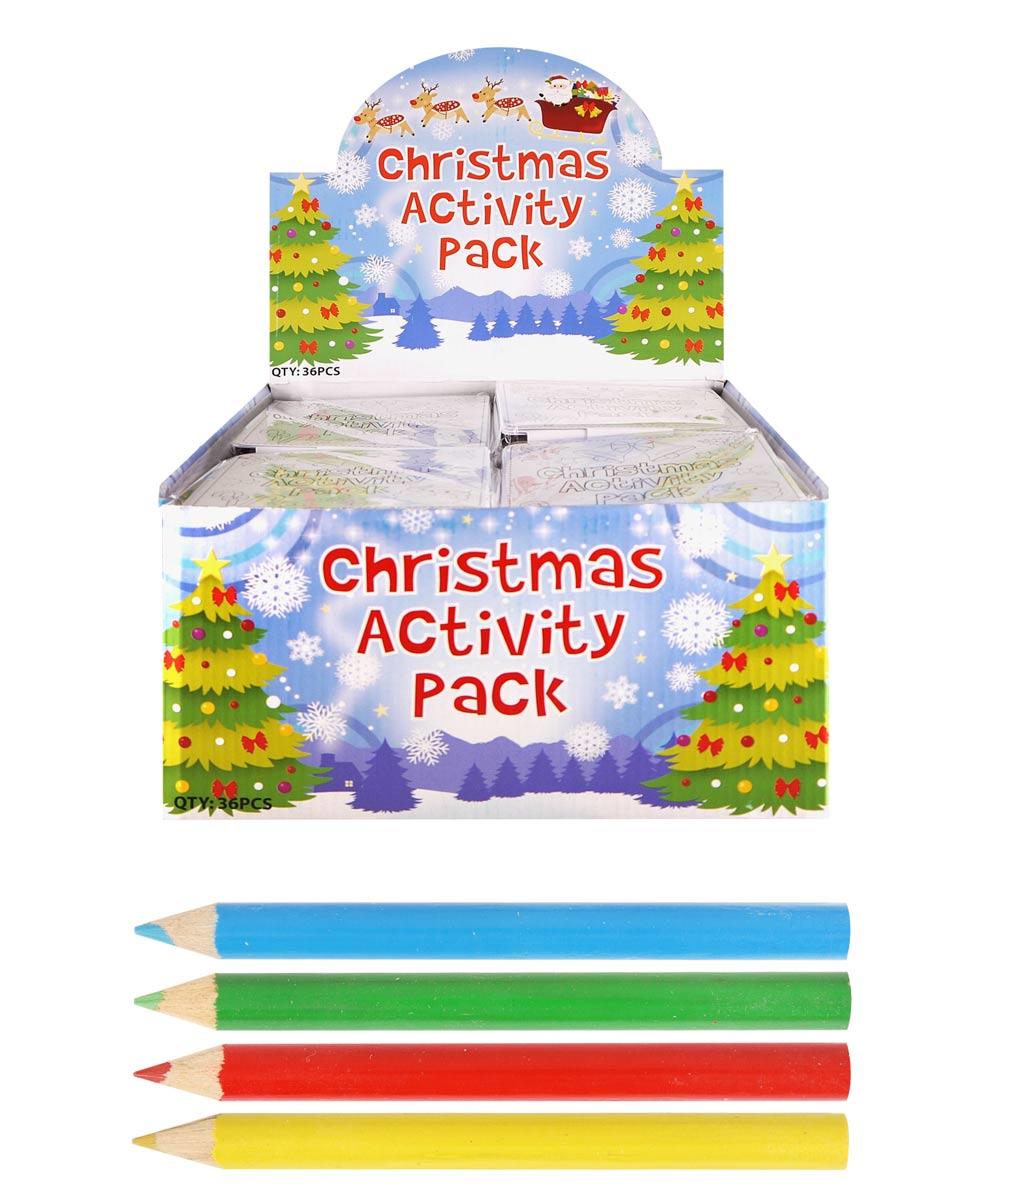 Christmas Activity Pack for Children by Henbrandt W51284 available here at Karnival Costumes online Christmas party shop